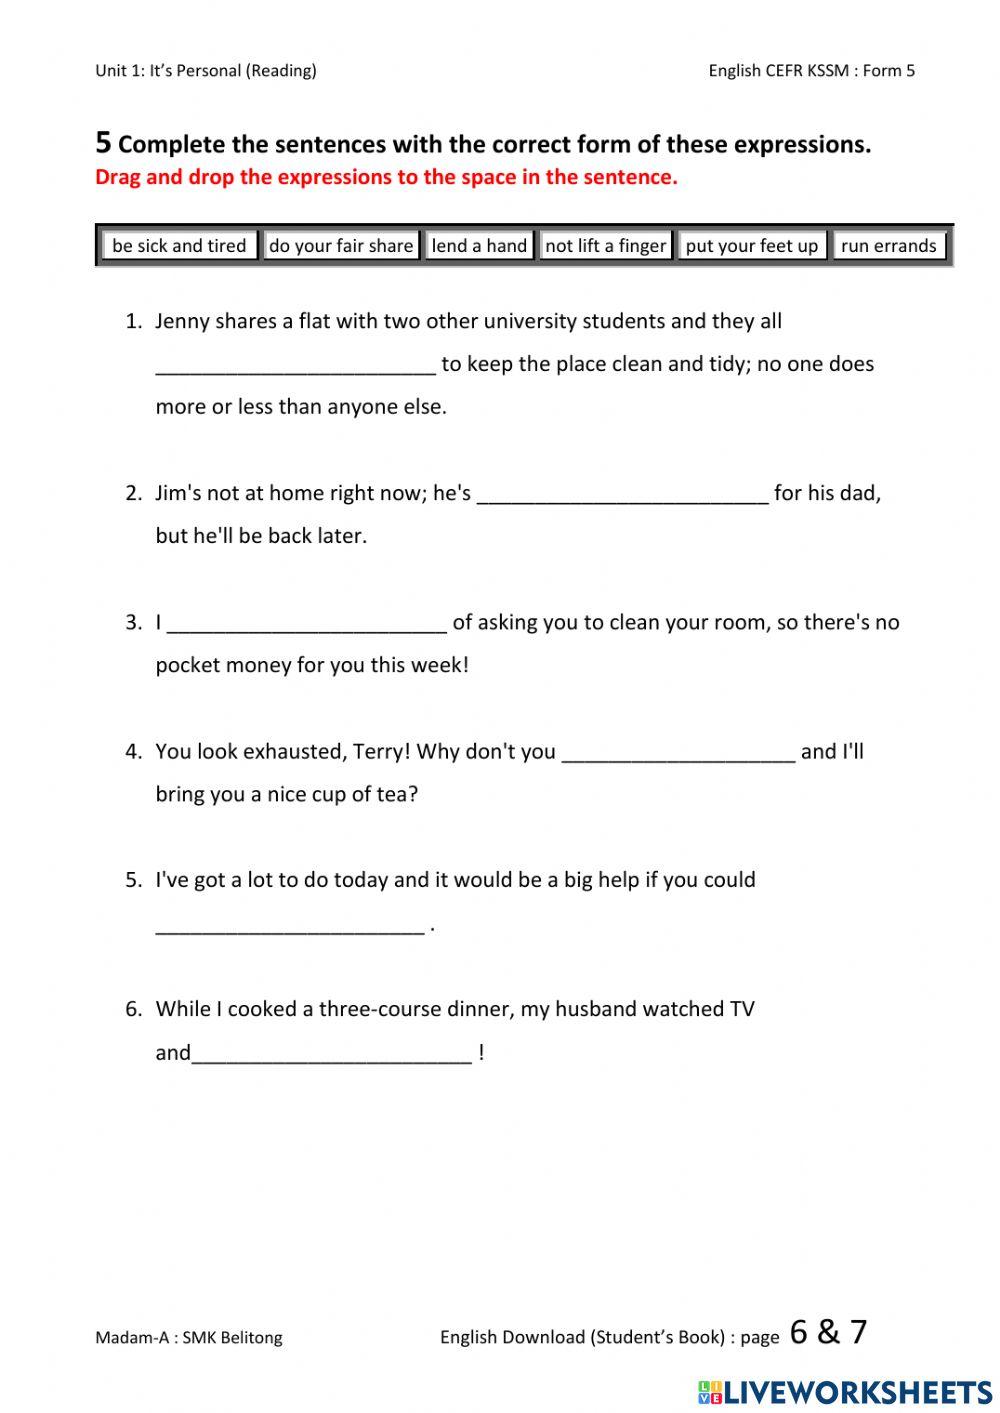 English CEFR Form 5 Unit 1: Page 7 (Reading)